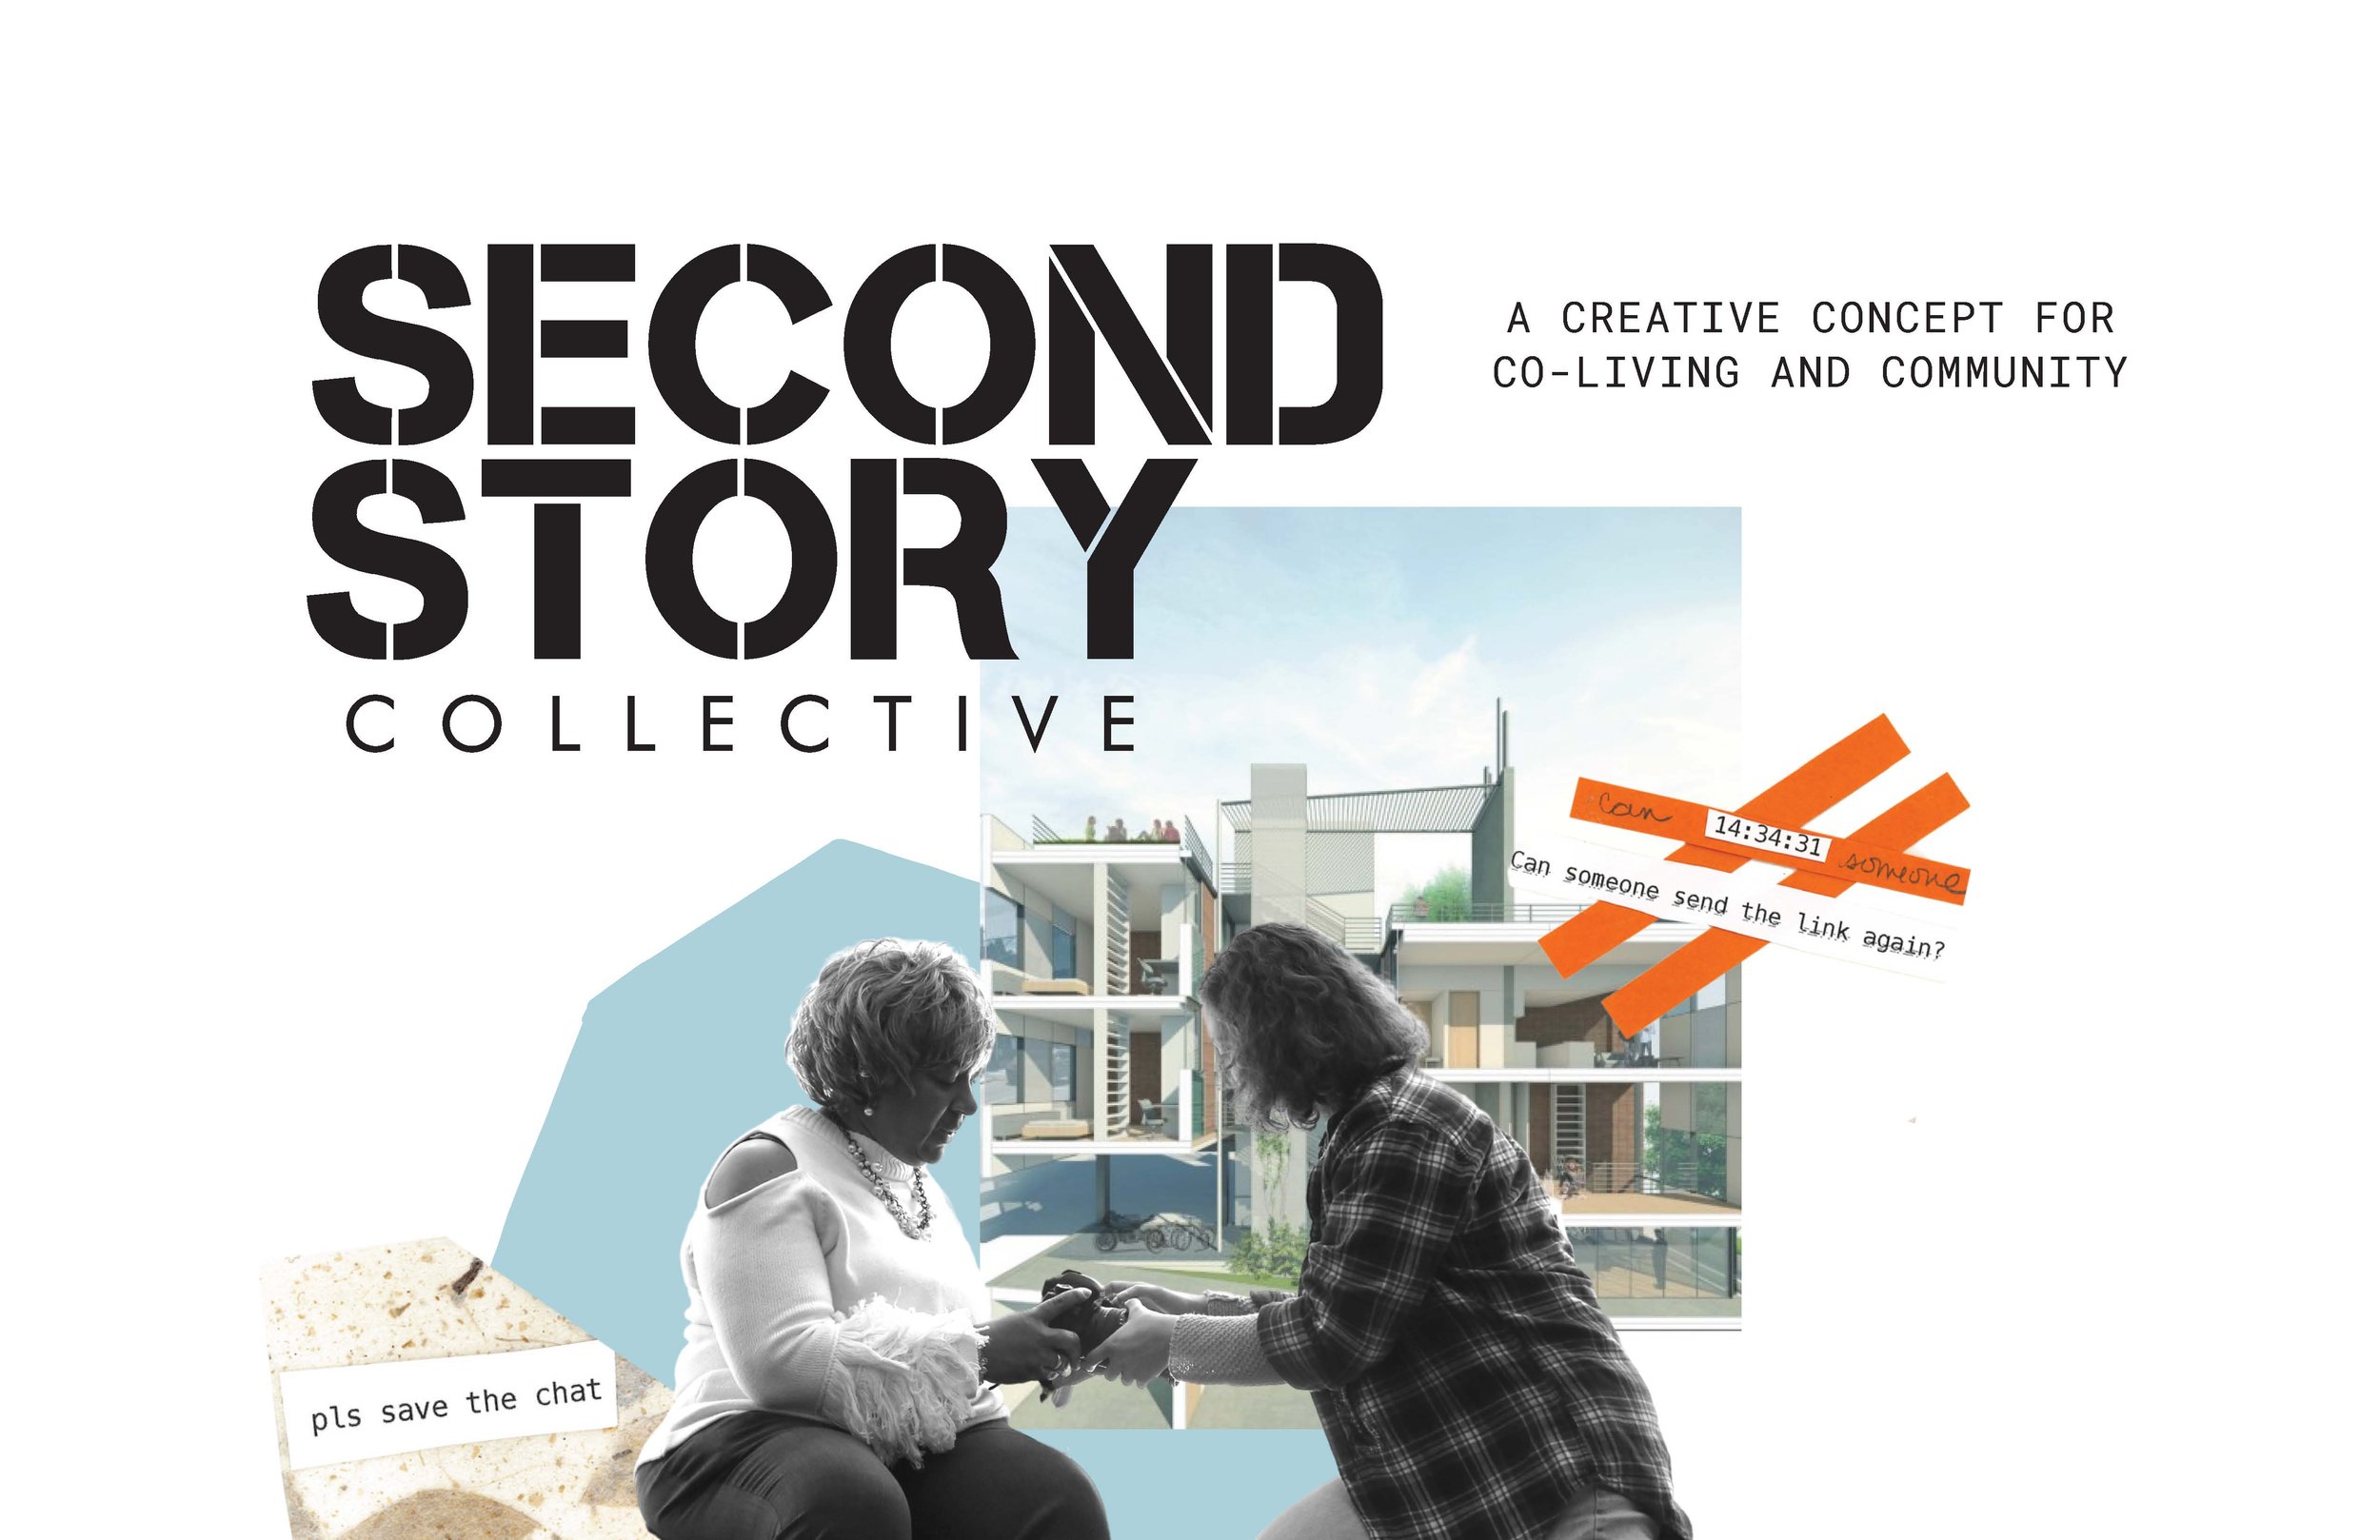 Second+Story+Collective+Pitch+Deck_Page_01.jpg